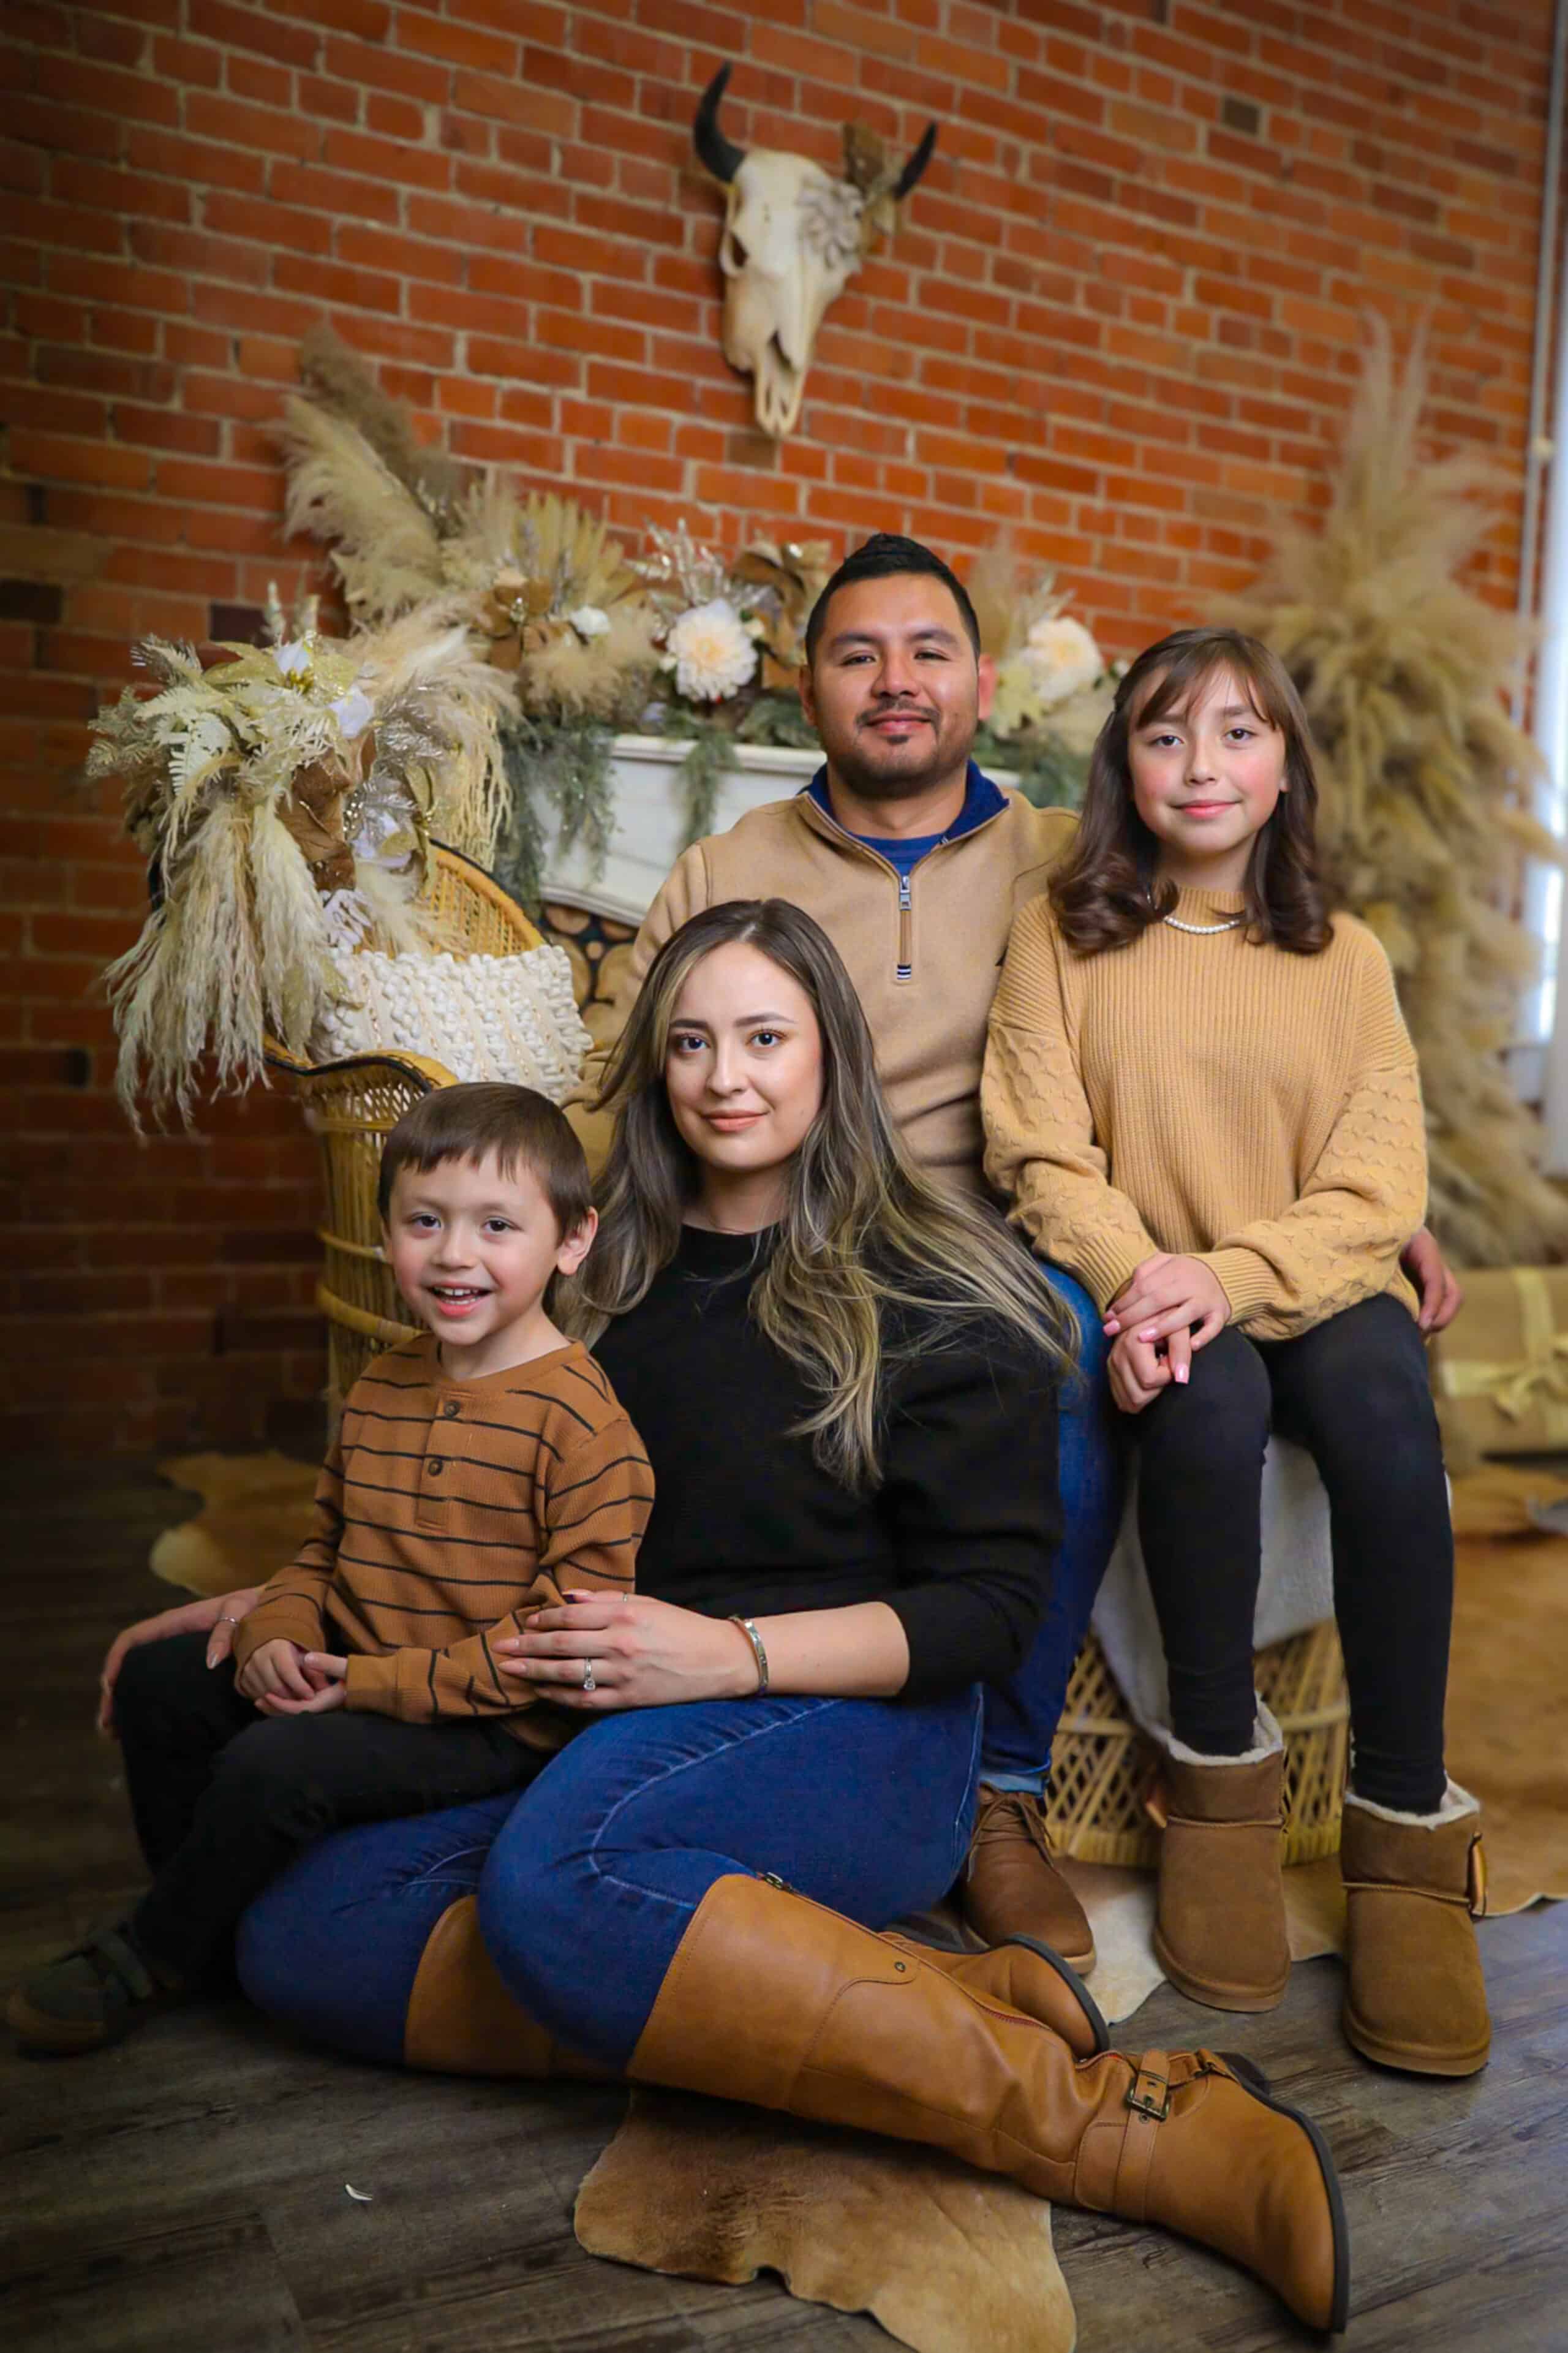 About Us -Meet one of the owners, Hector, of Footprint Home Experts. Foot Print Home Experts proudly serves Colorado Springs, Monument, Castlerock, Denver, Peyton, and Black Forrest.